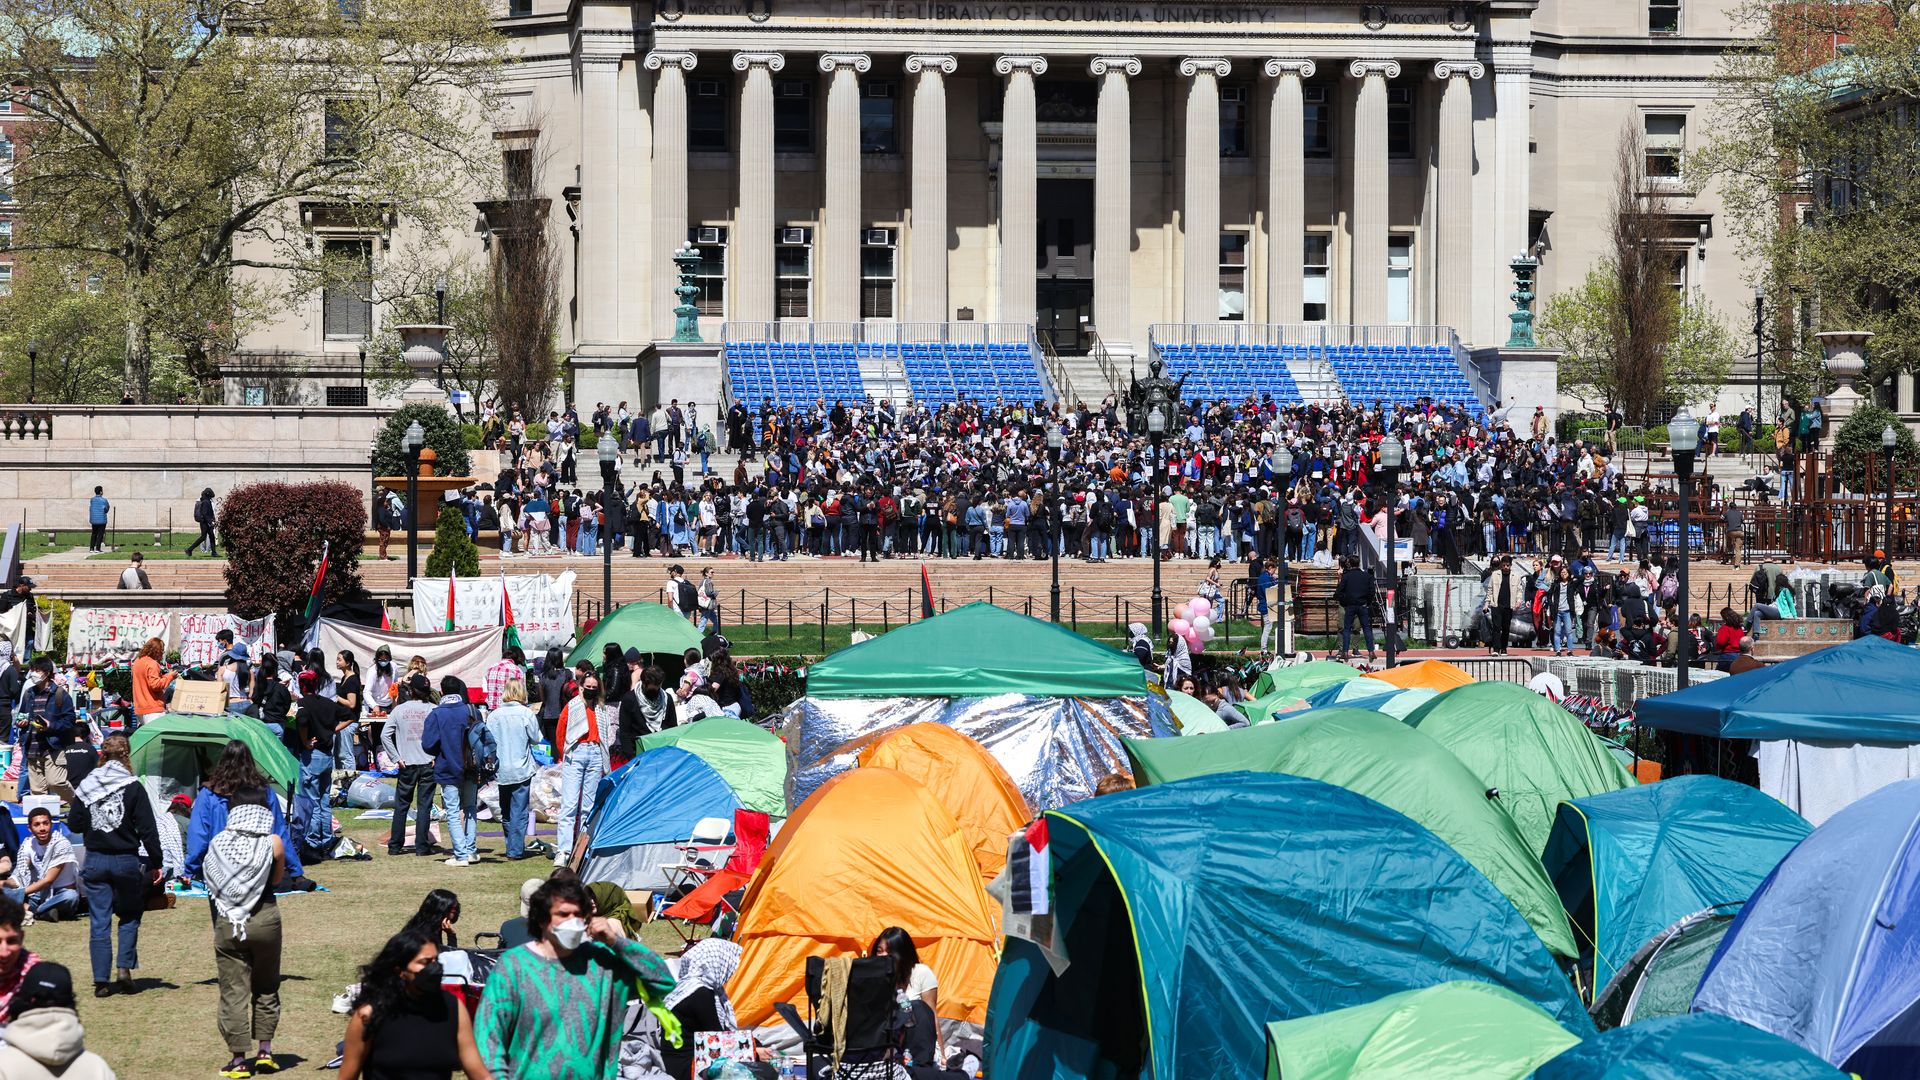 About seven tents are seen on Columbia's lawn with people walking in the foreground and background of the image. 